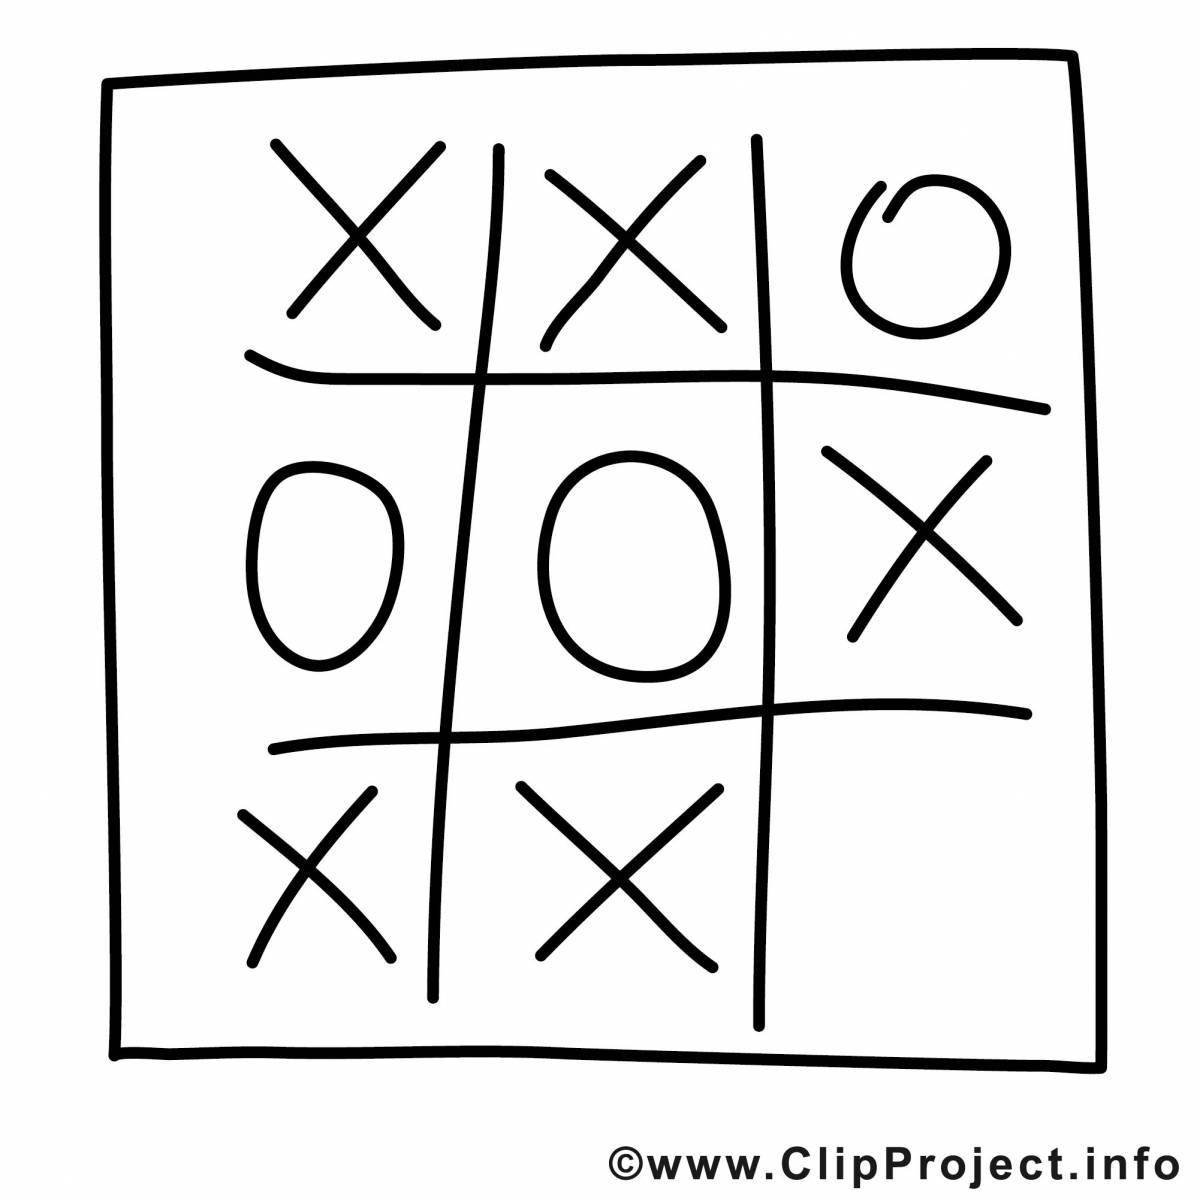 Colorful tic-tac-toe coloring page